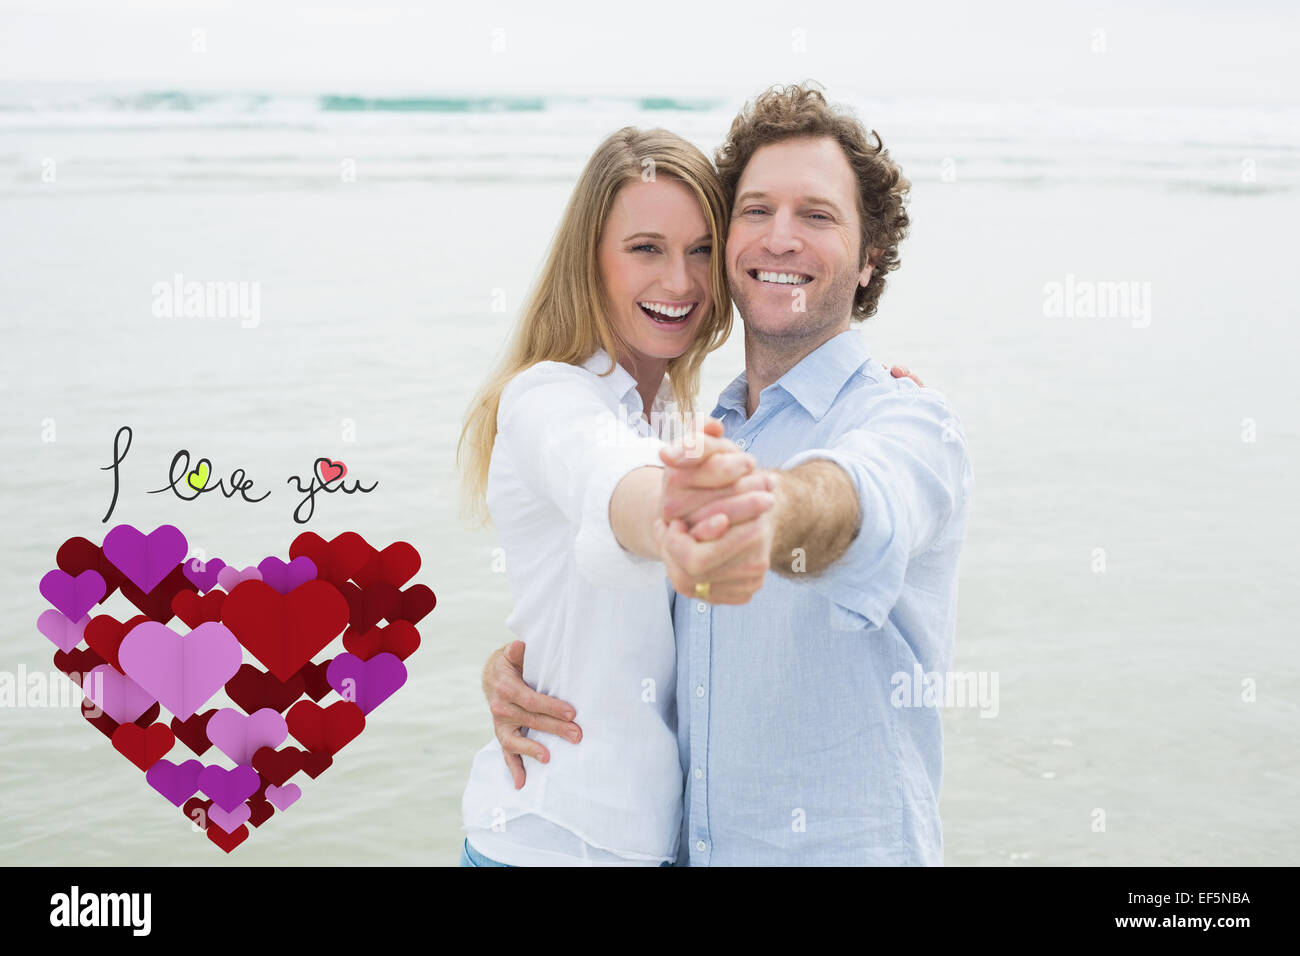 Composite image of portrait of cheerful couple dancing at beach Stock Photo